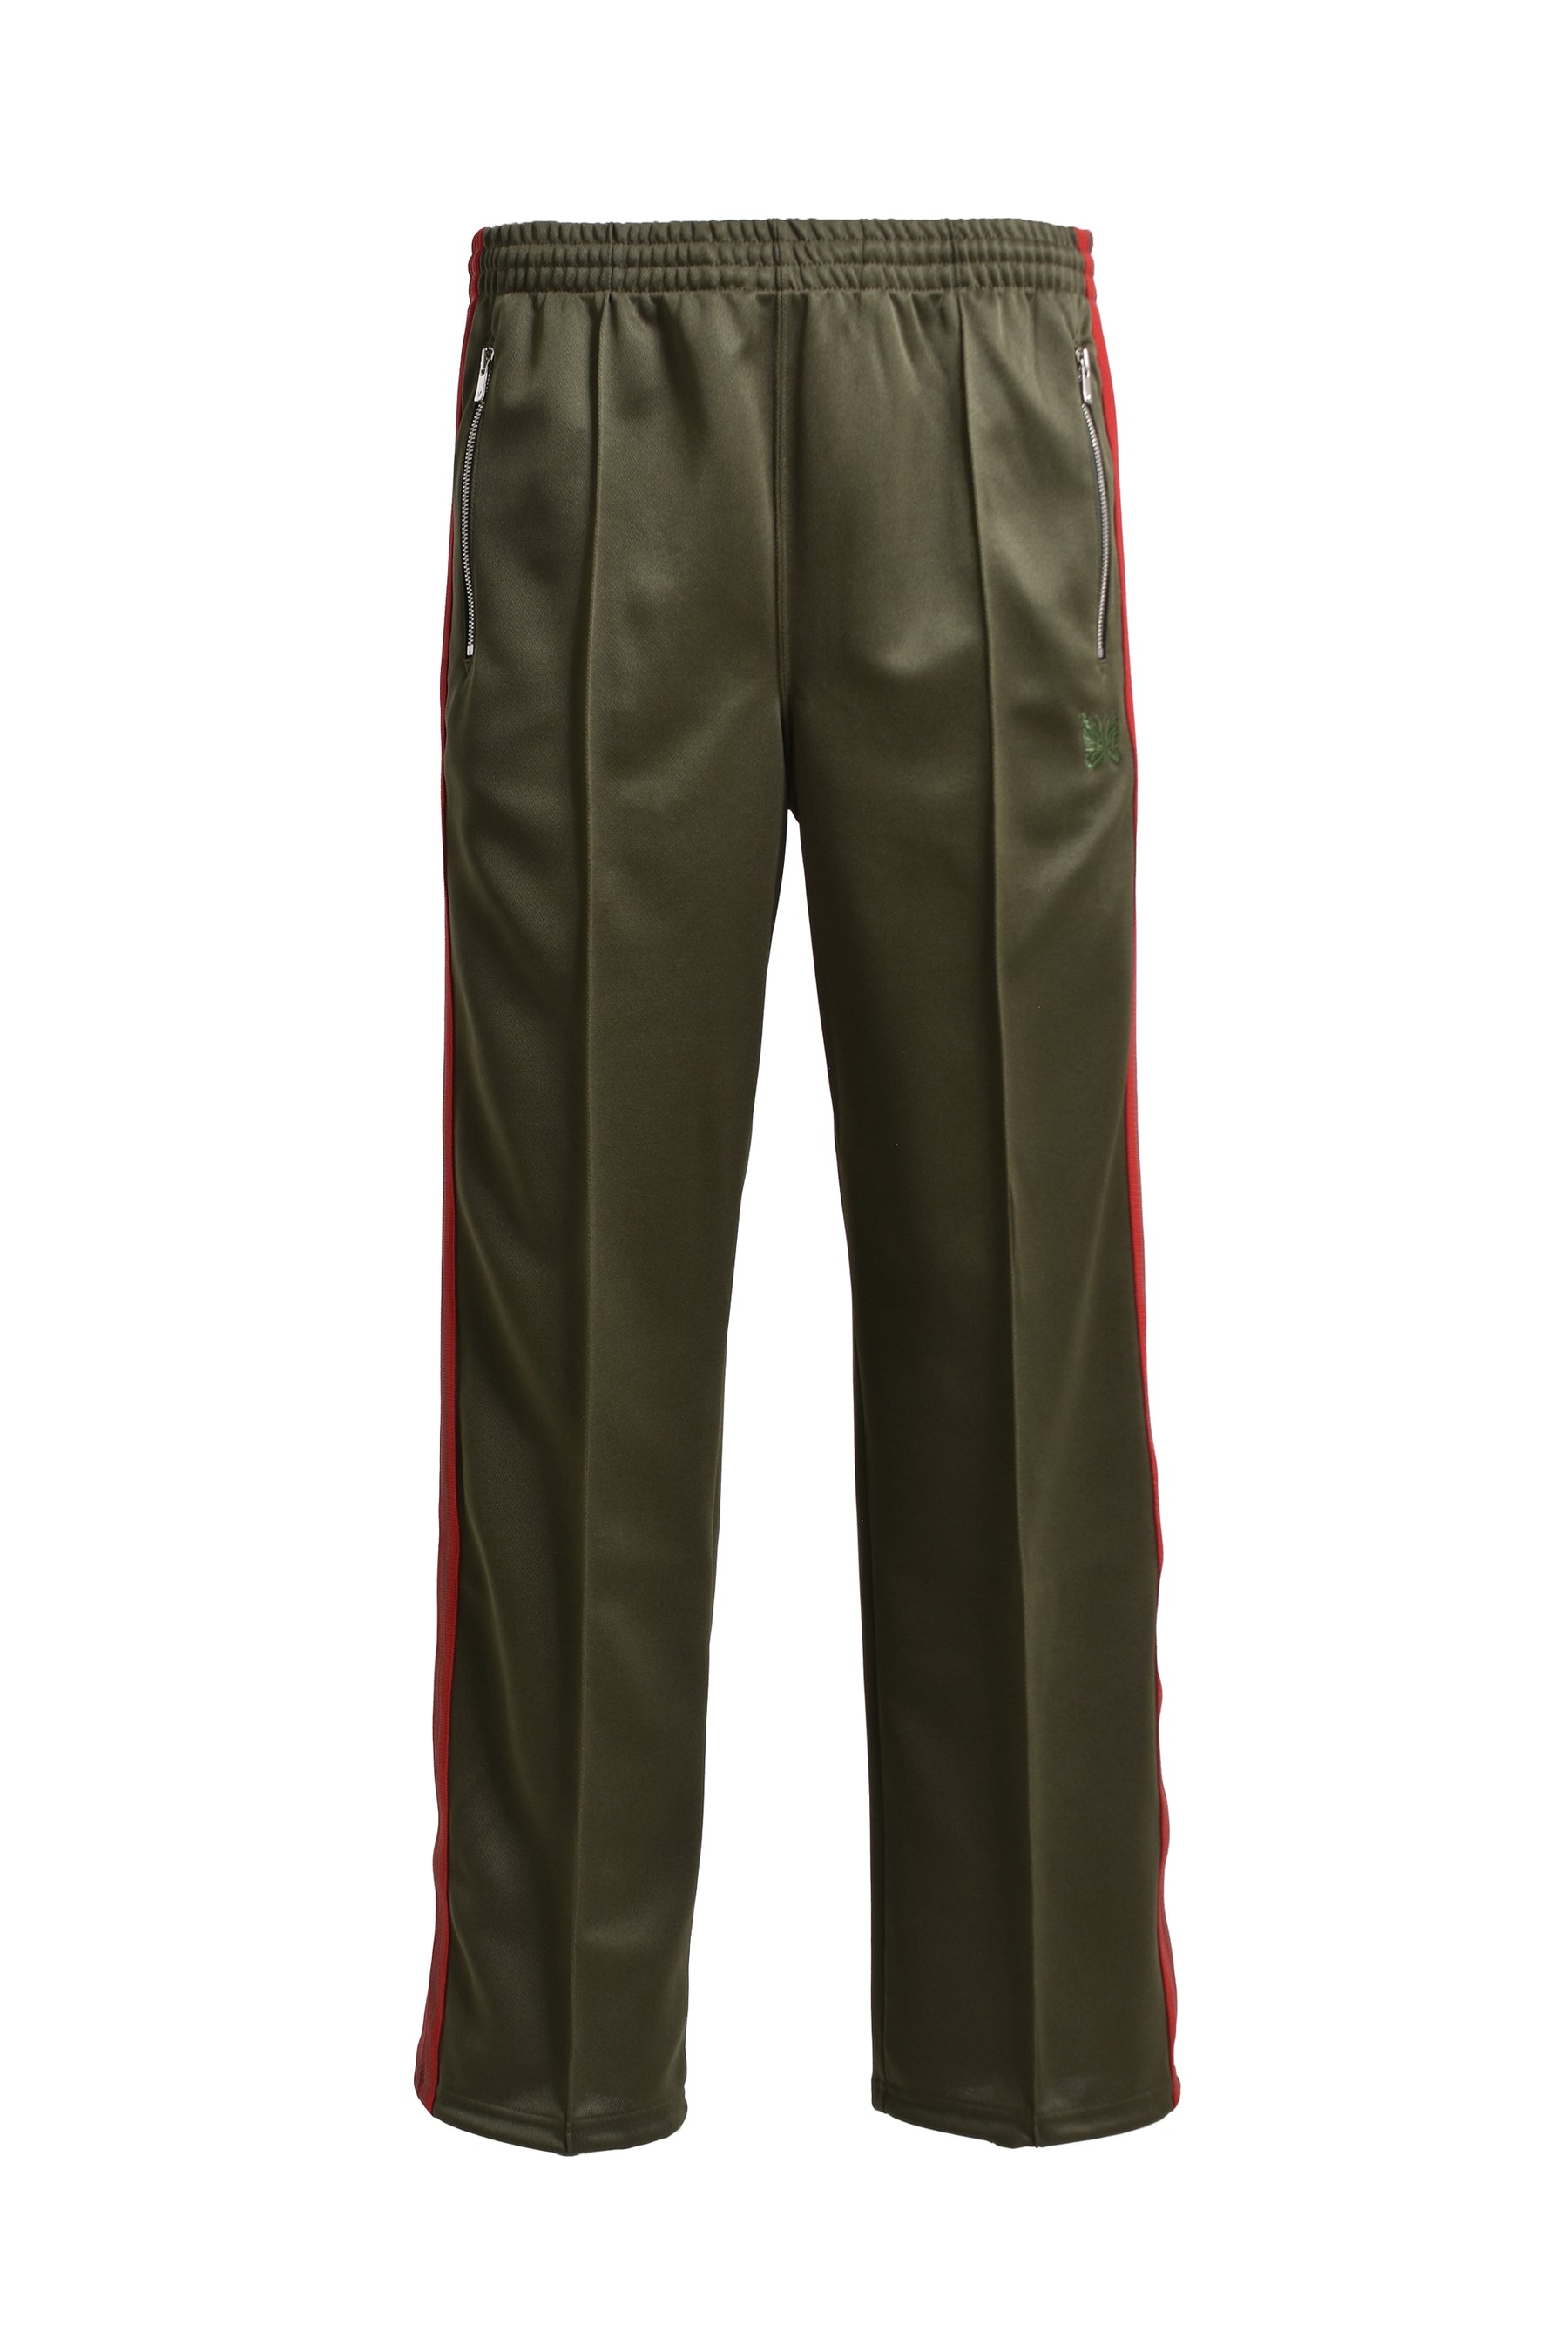 TRACK PANT - POLY SMOOTH (EXCLUSIVE) / OLV RED BRW